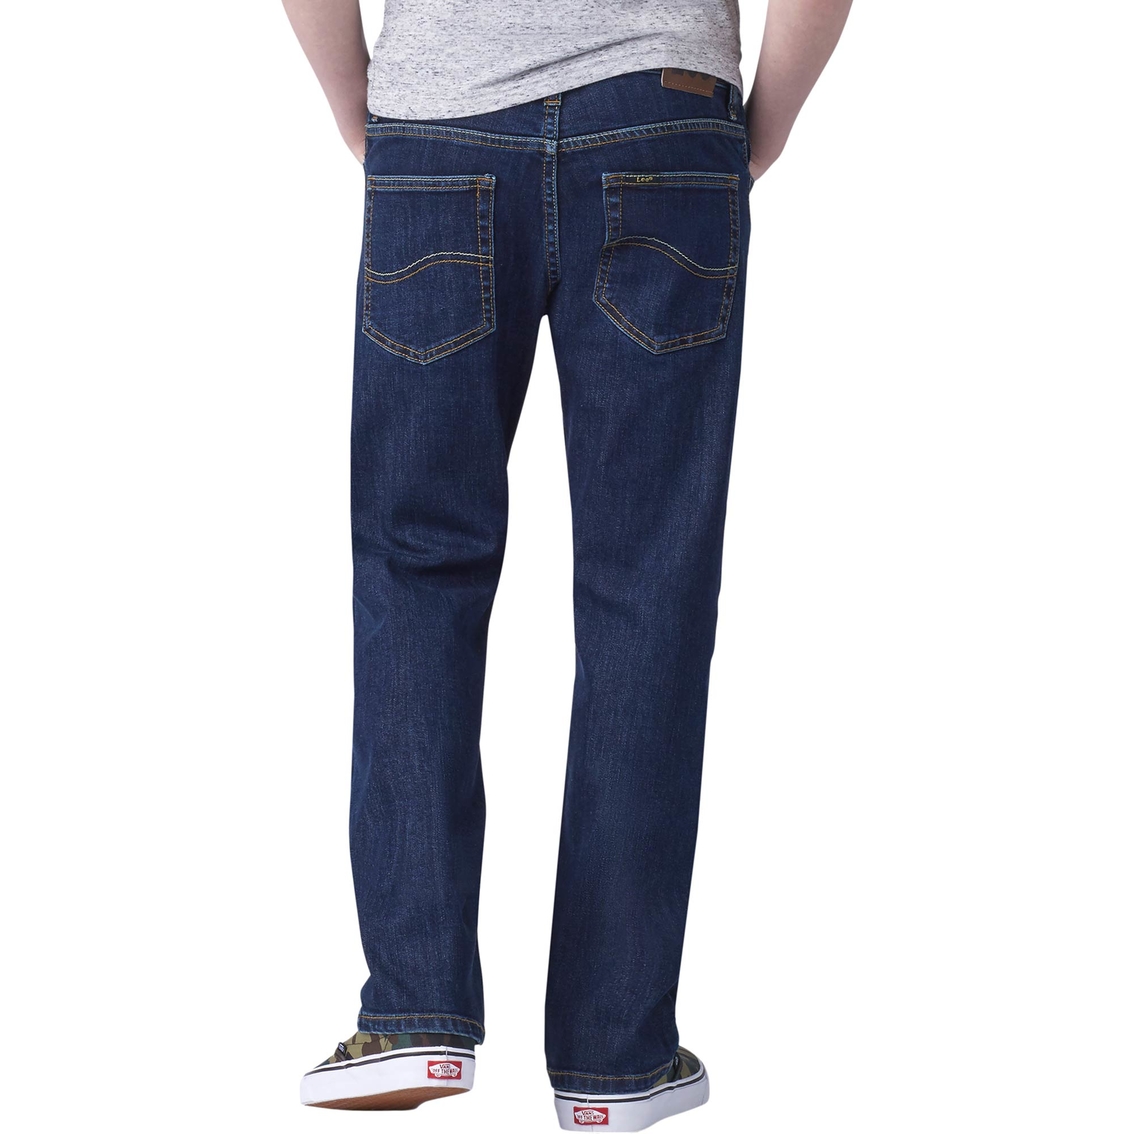 Lee Boys Proof Straight Leg Jeans | Boys 8-20 | Clothing & Accessories ...